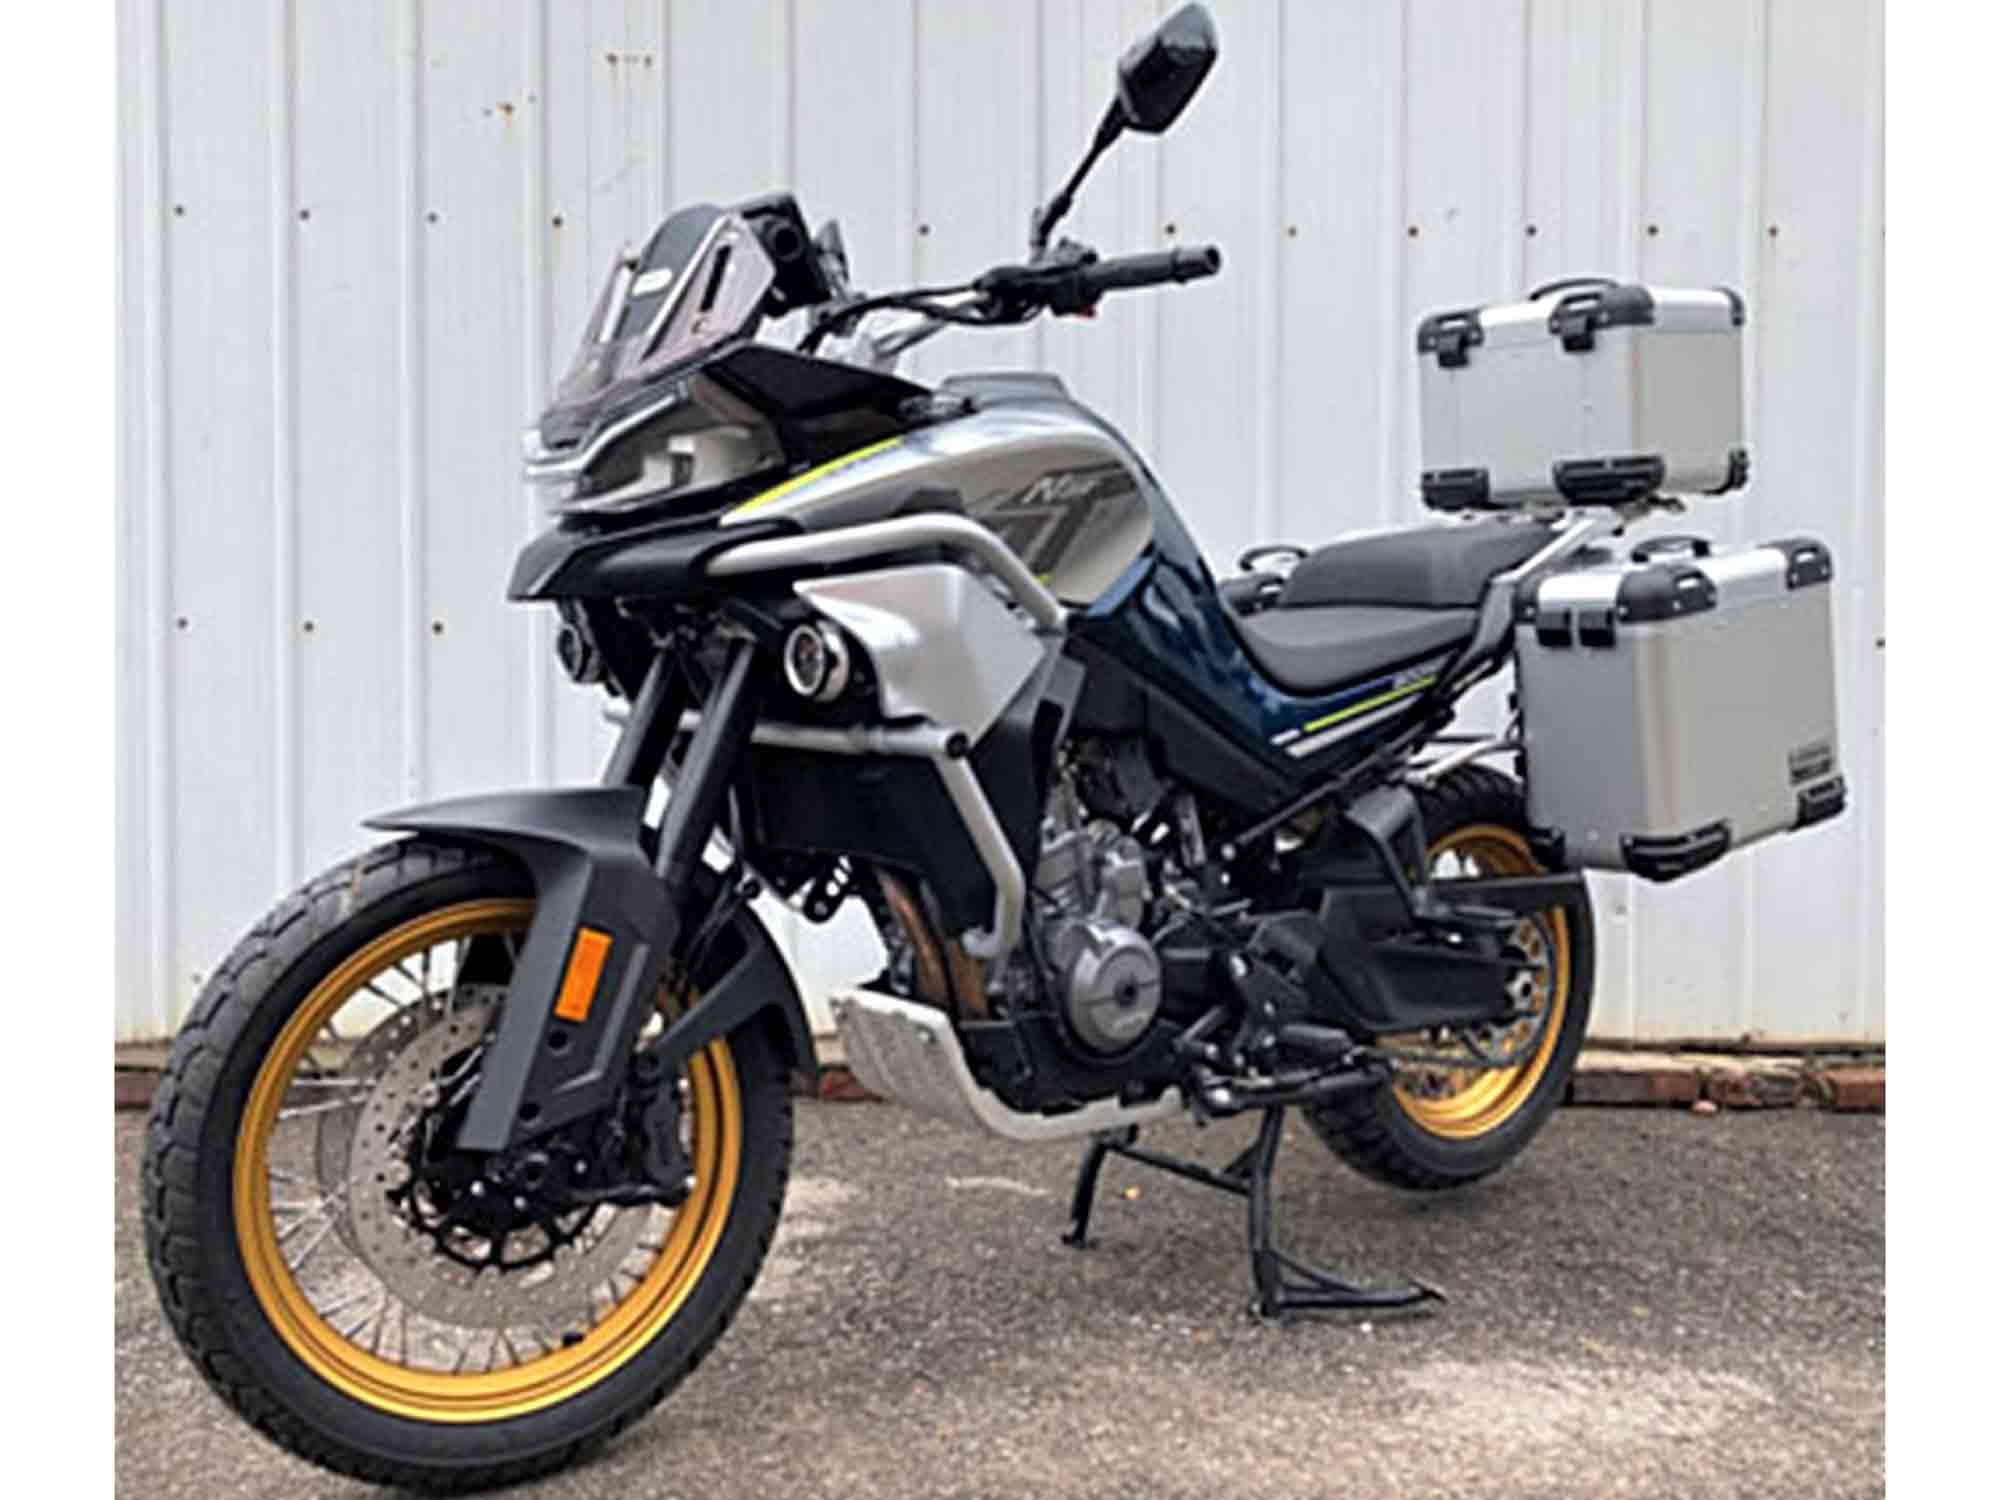 The adv-oriented model gets a skid plate and wire-spoked wheels, but otherwise looks very similar.